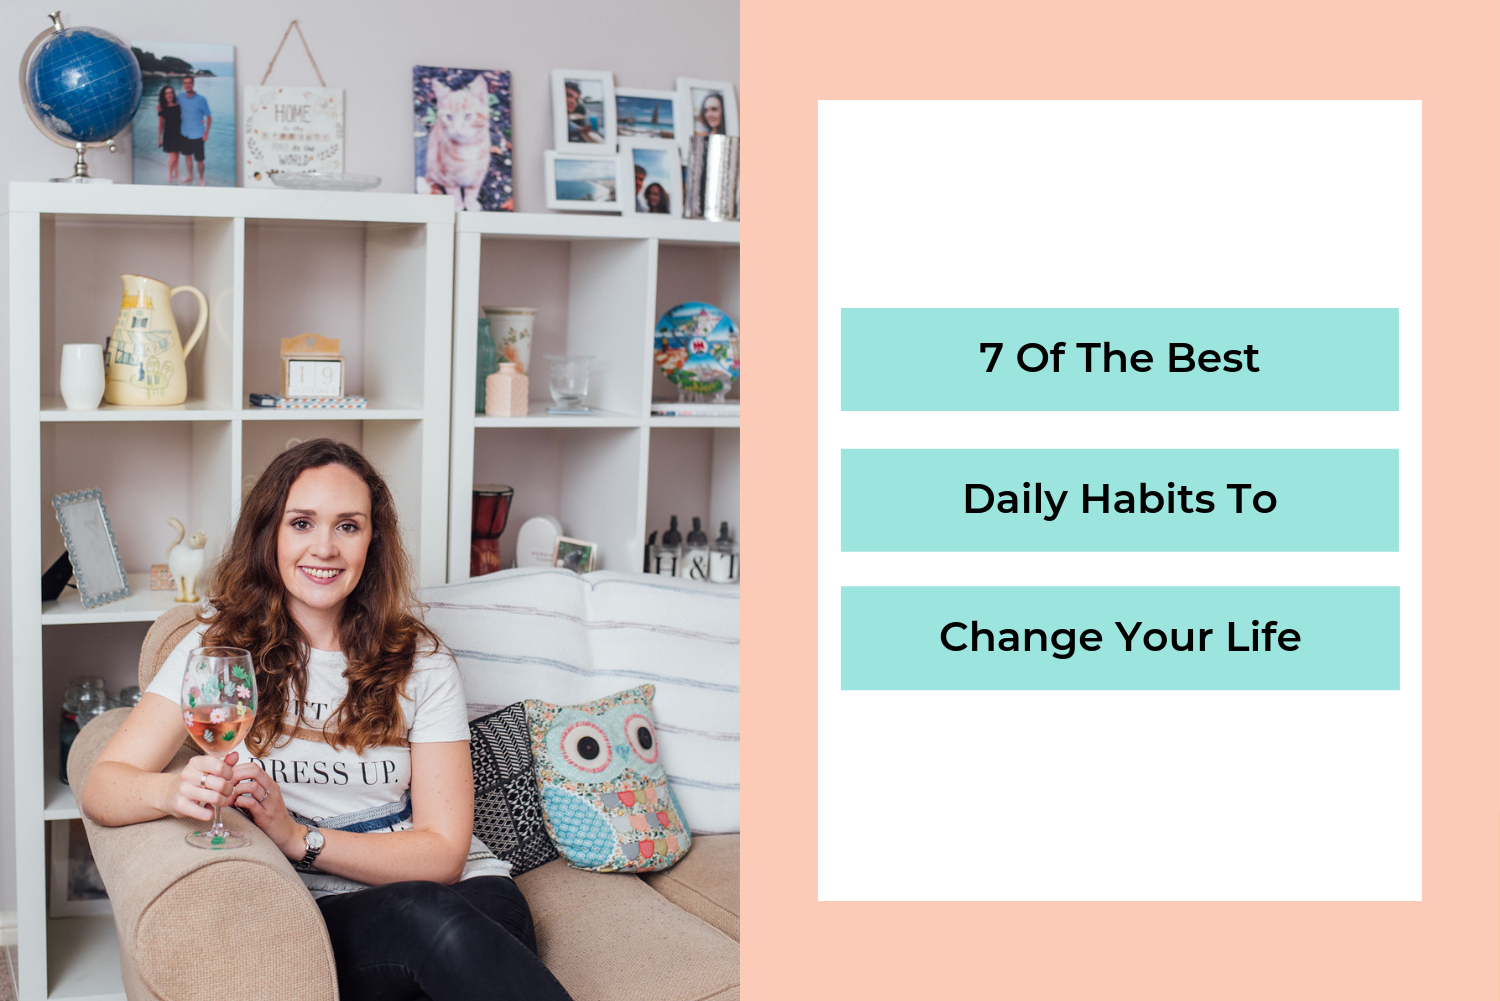 Do You Want To Change Your Life For The Better? 7 Ways To Make It A Habit